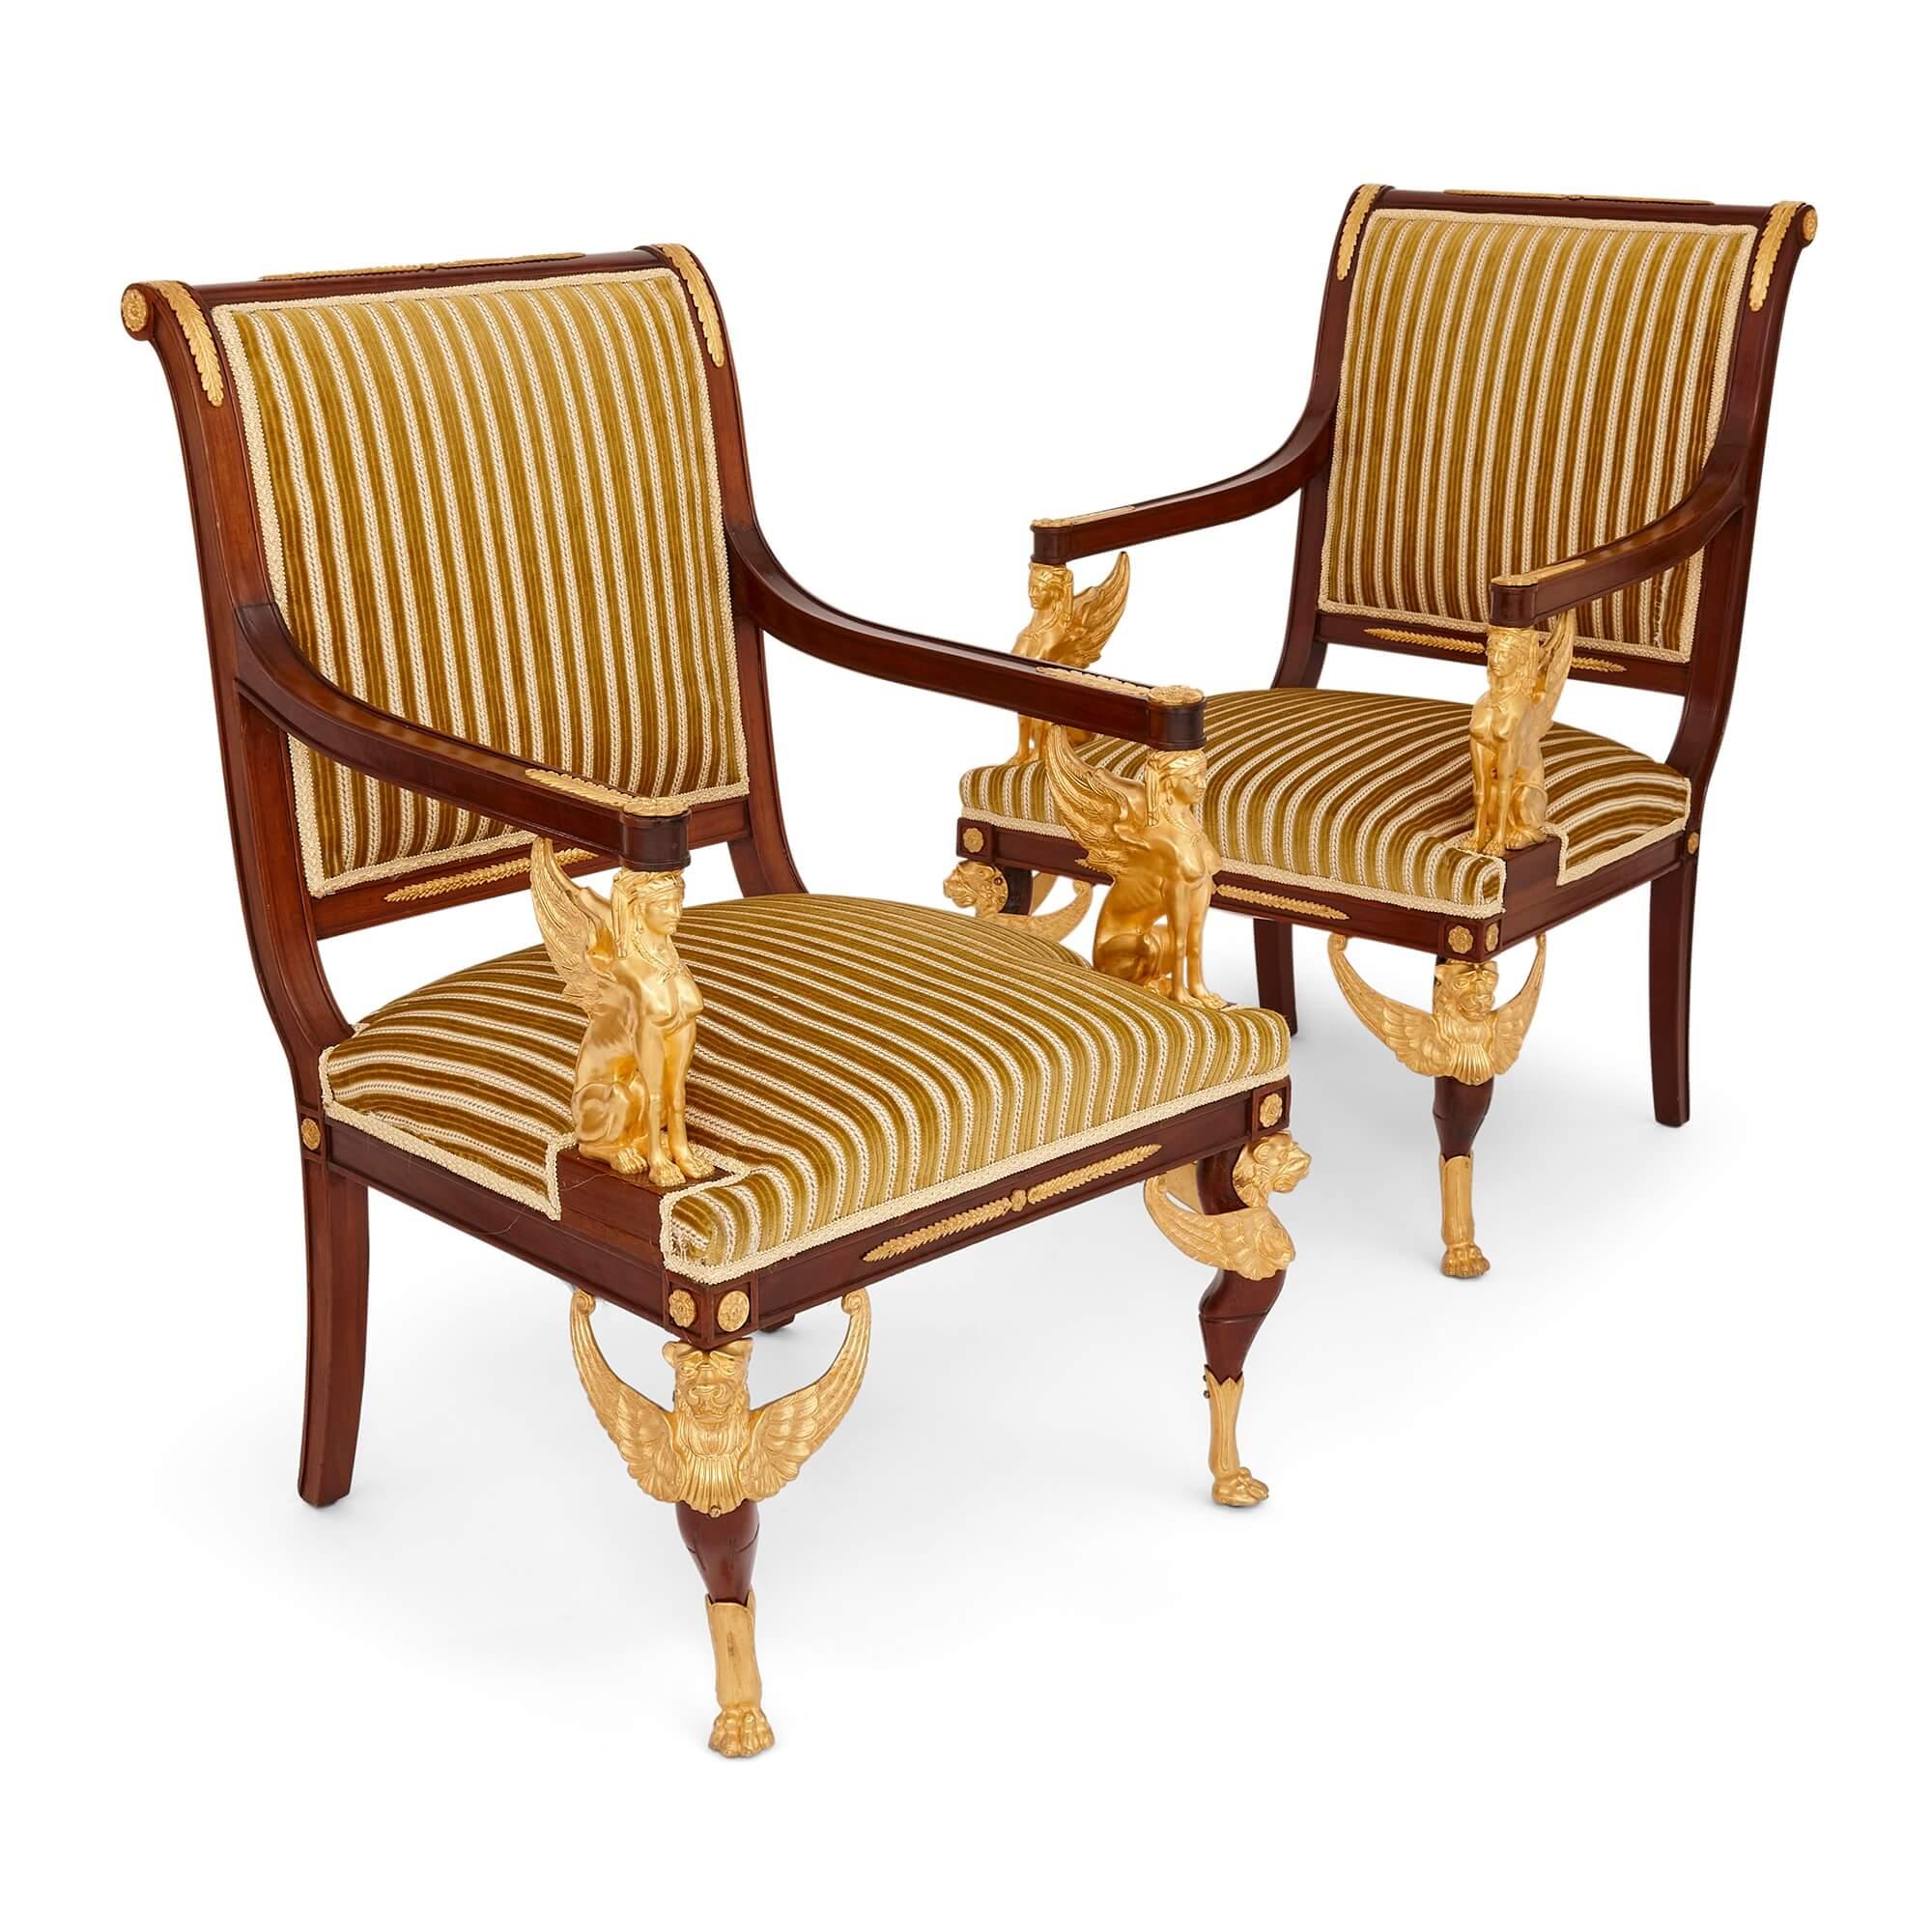 19th Century French Empire Style Gilt-Bronze and Mahogany Five-Piece Salon Suite For Sale